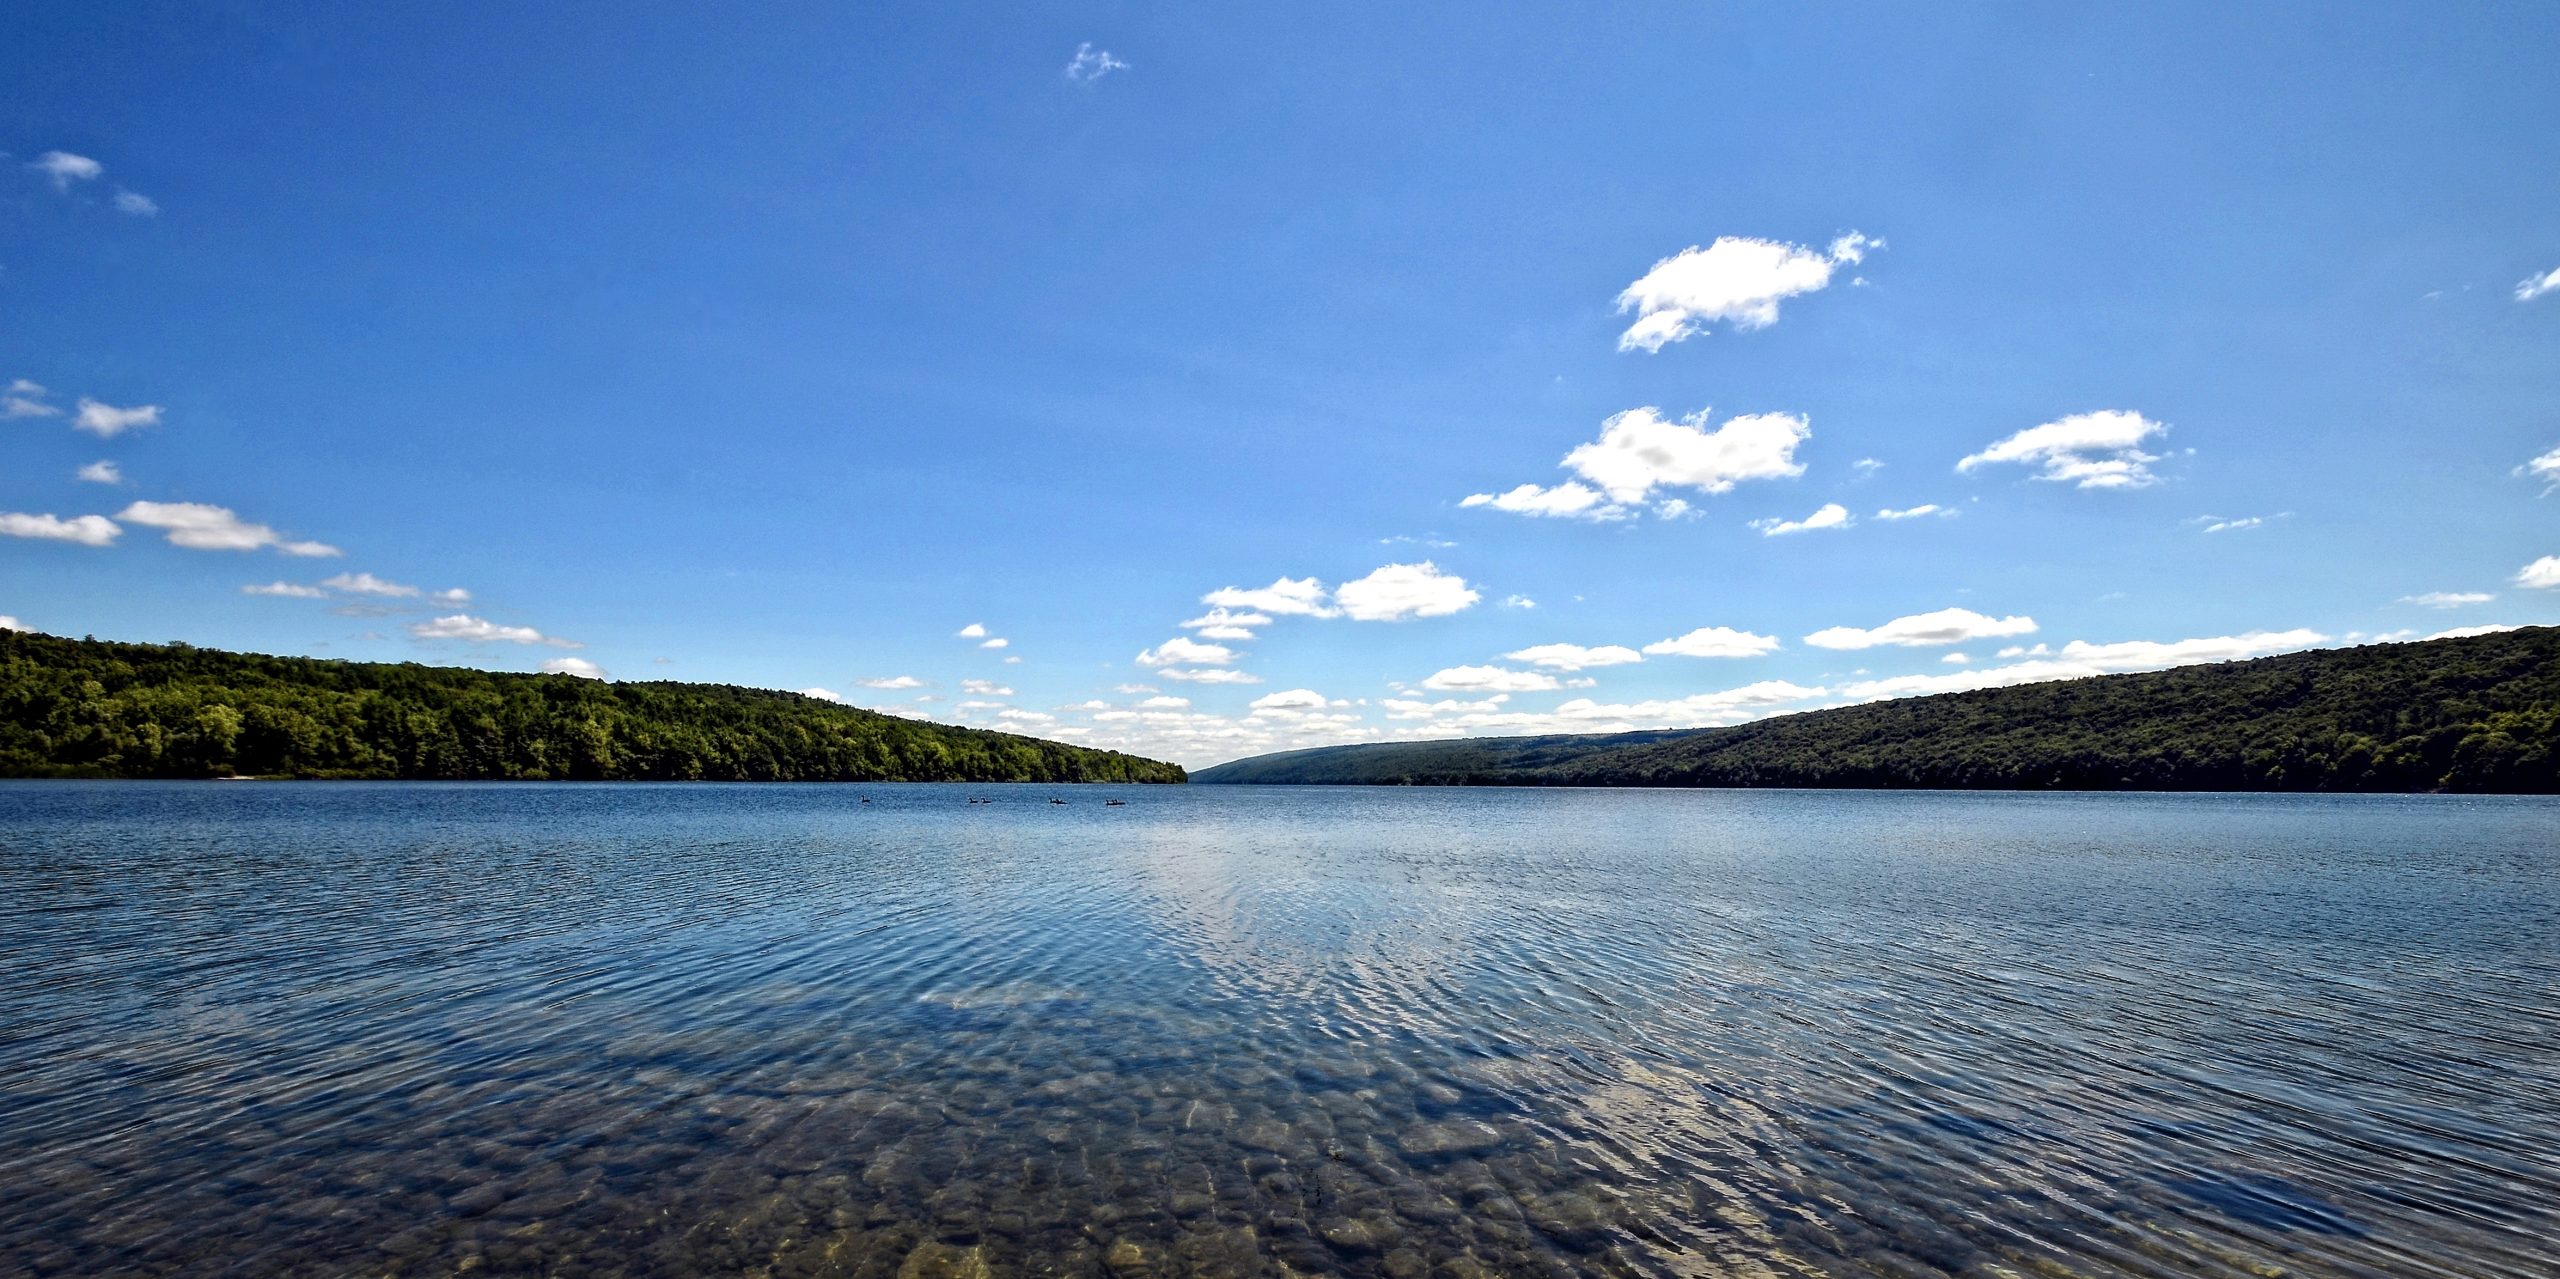 The Finger Lakes